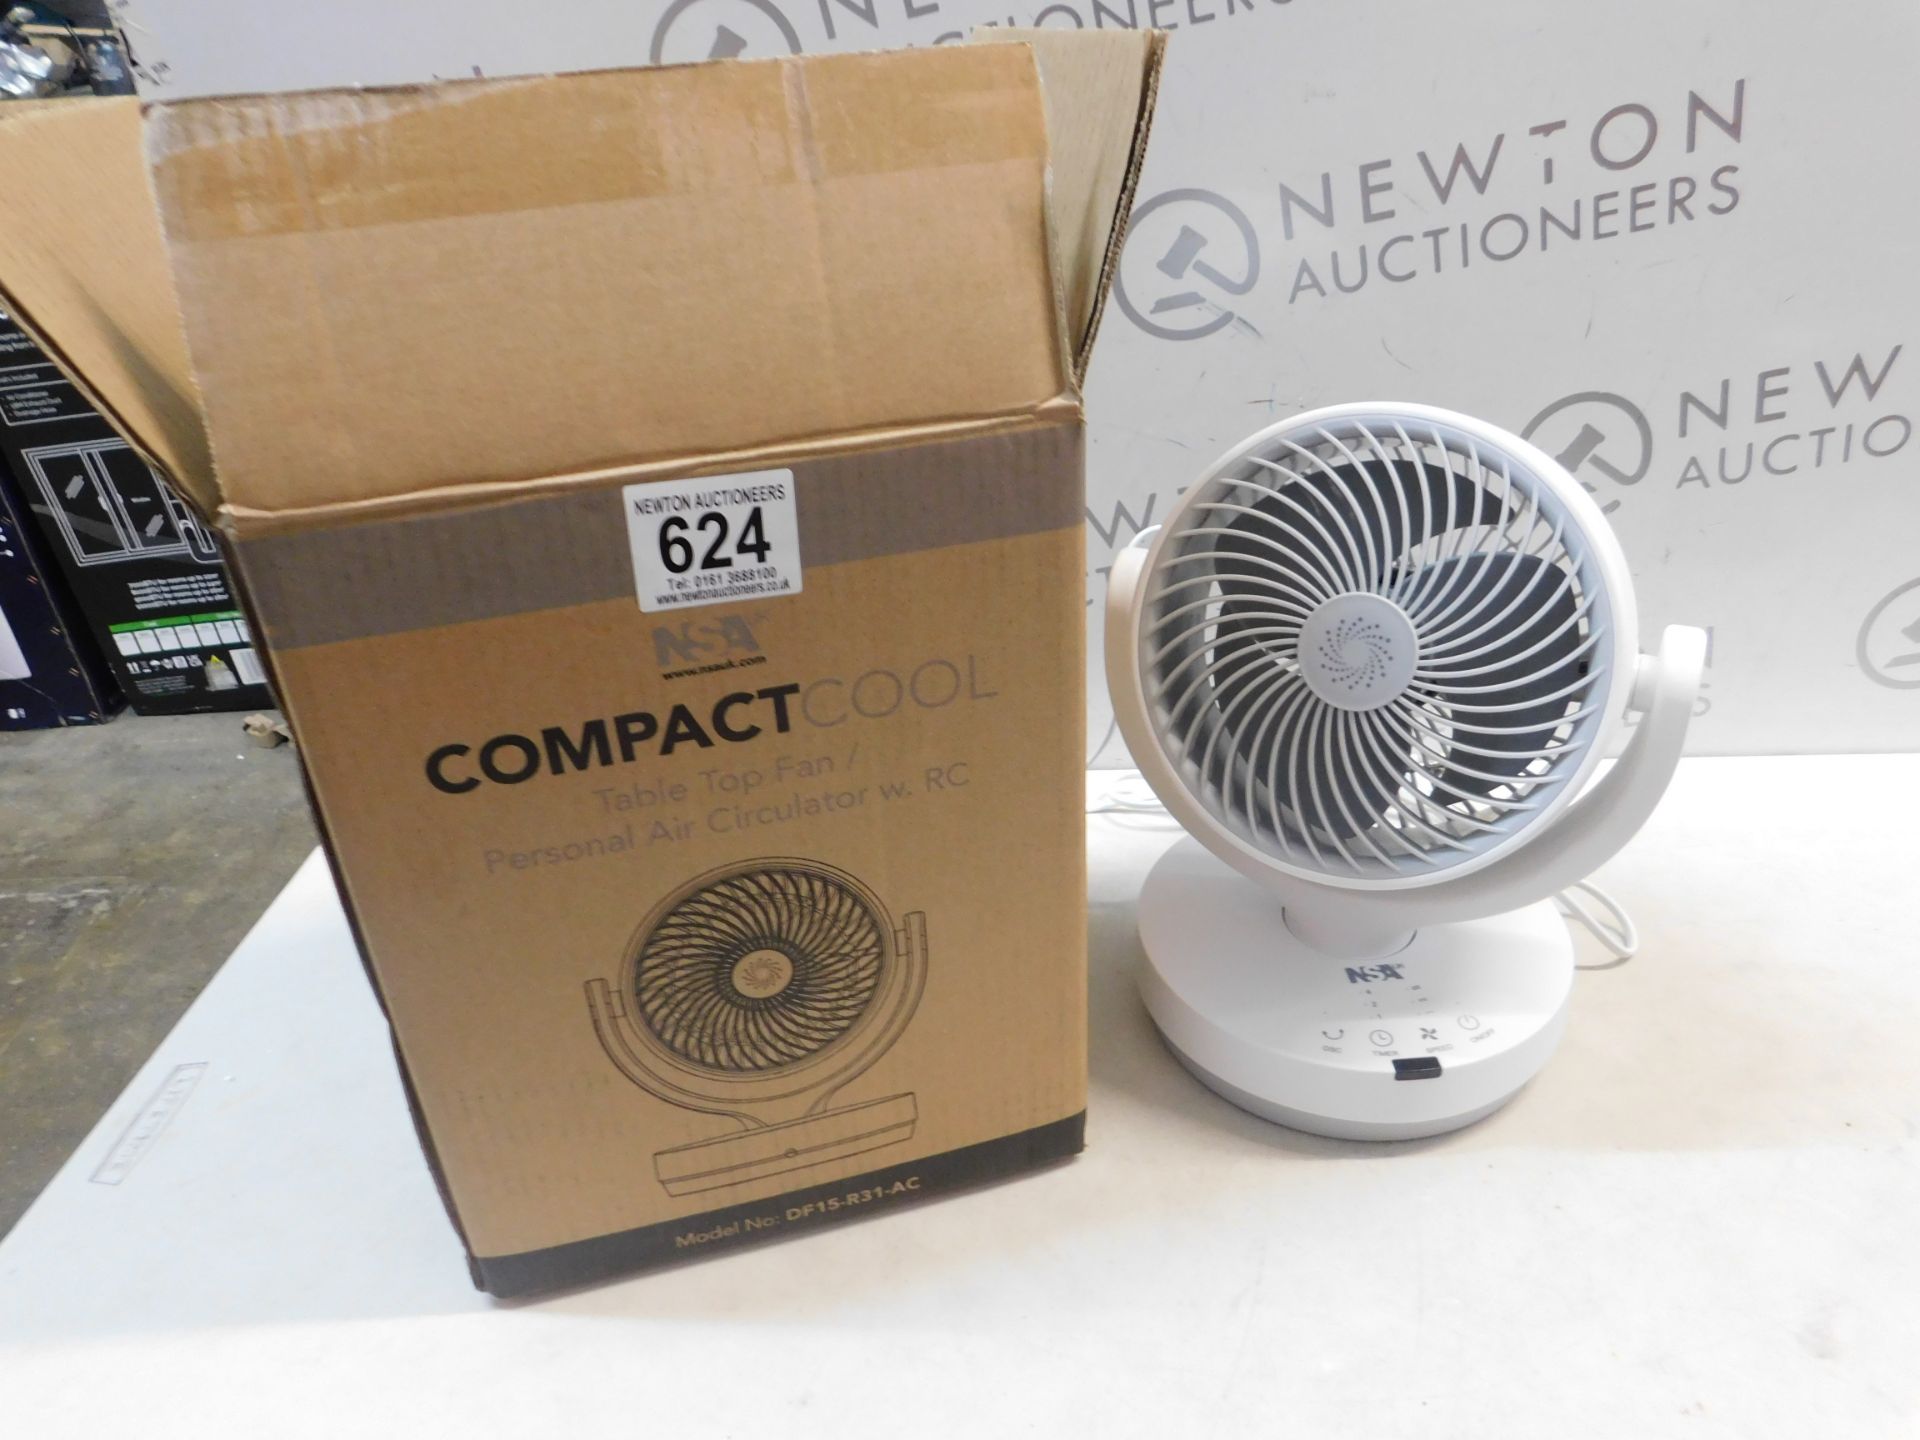 1 BOXED NSA COMPACT COOL AIR CIRCULATOR WITH REMOTE CONTROL, DF15-R31-AC RRP Â£49.99